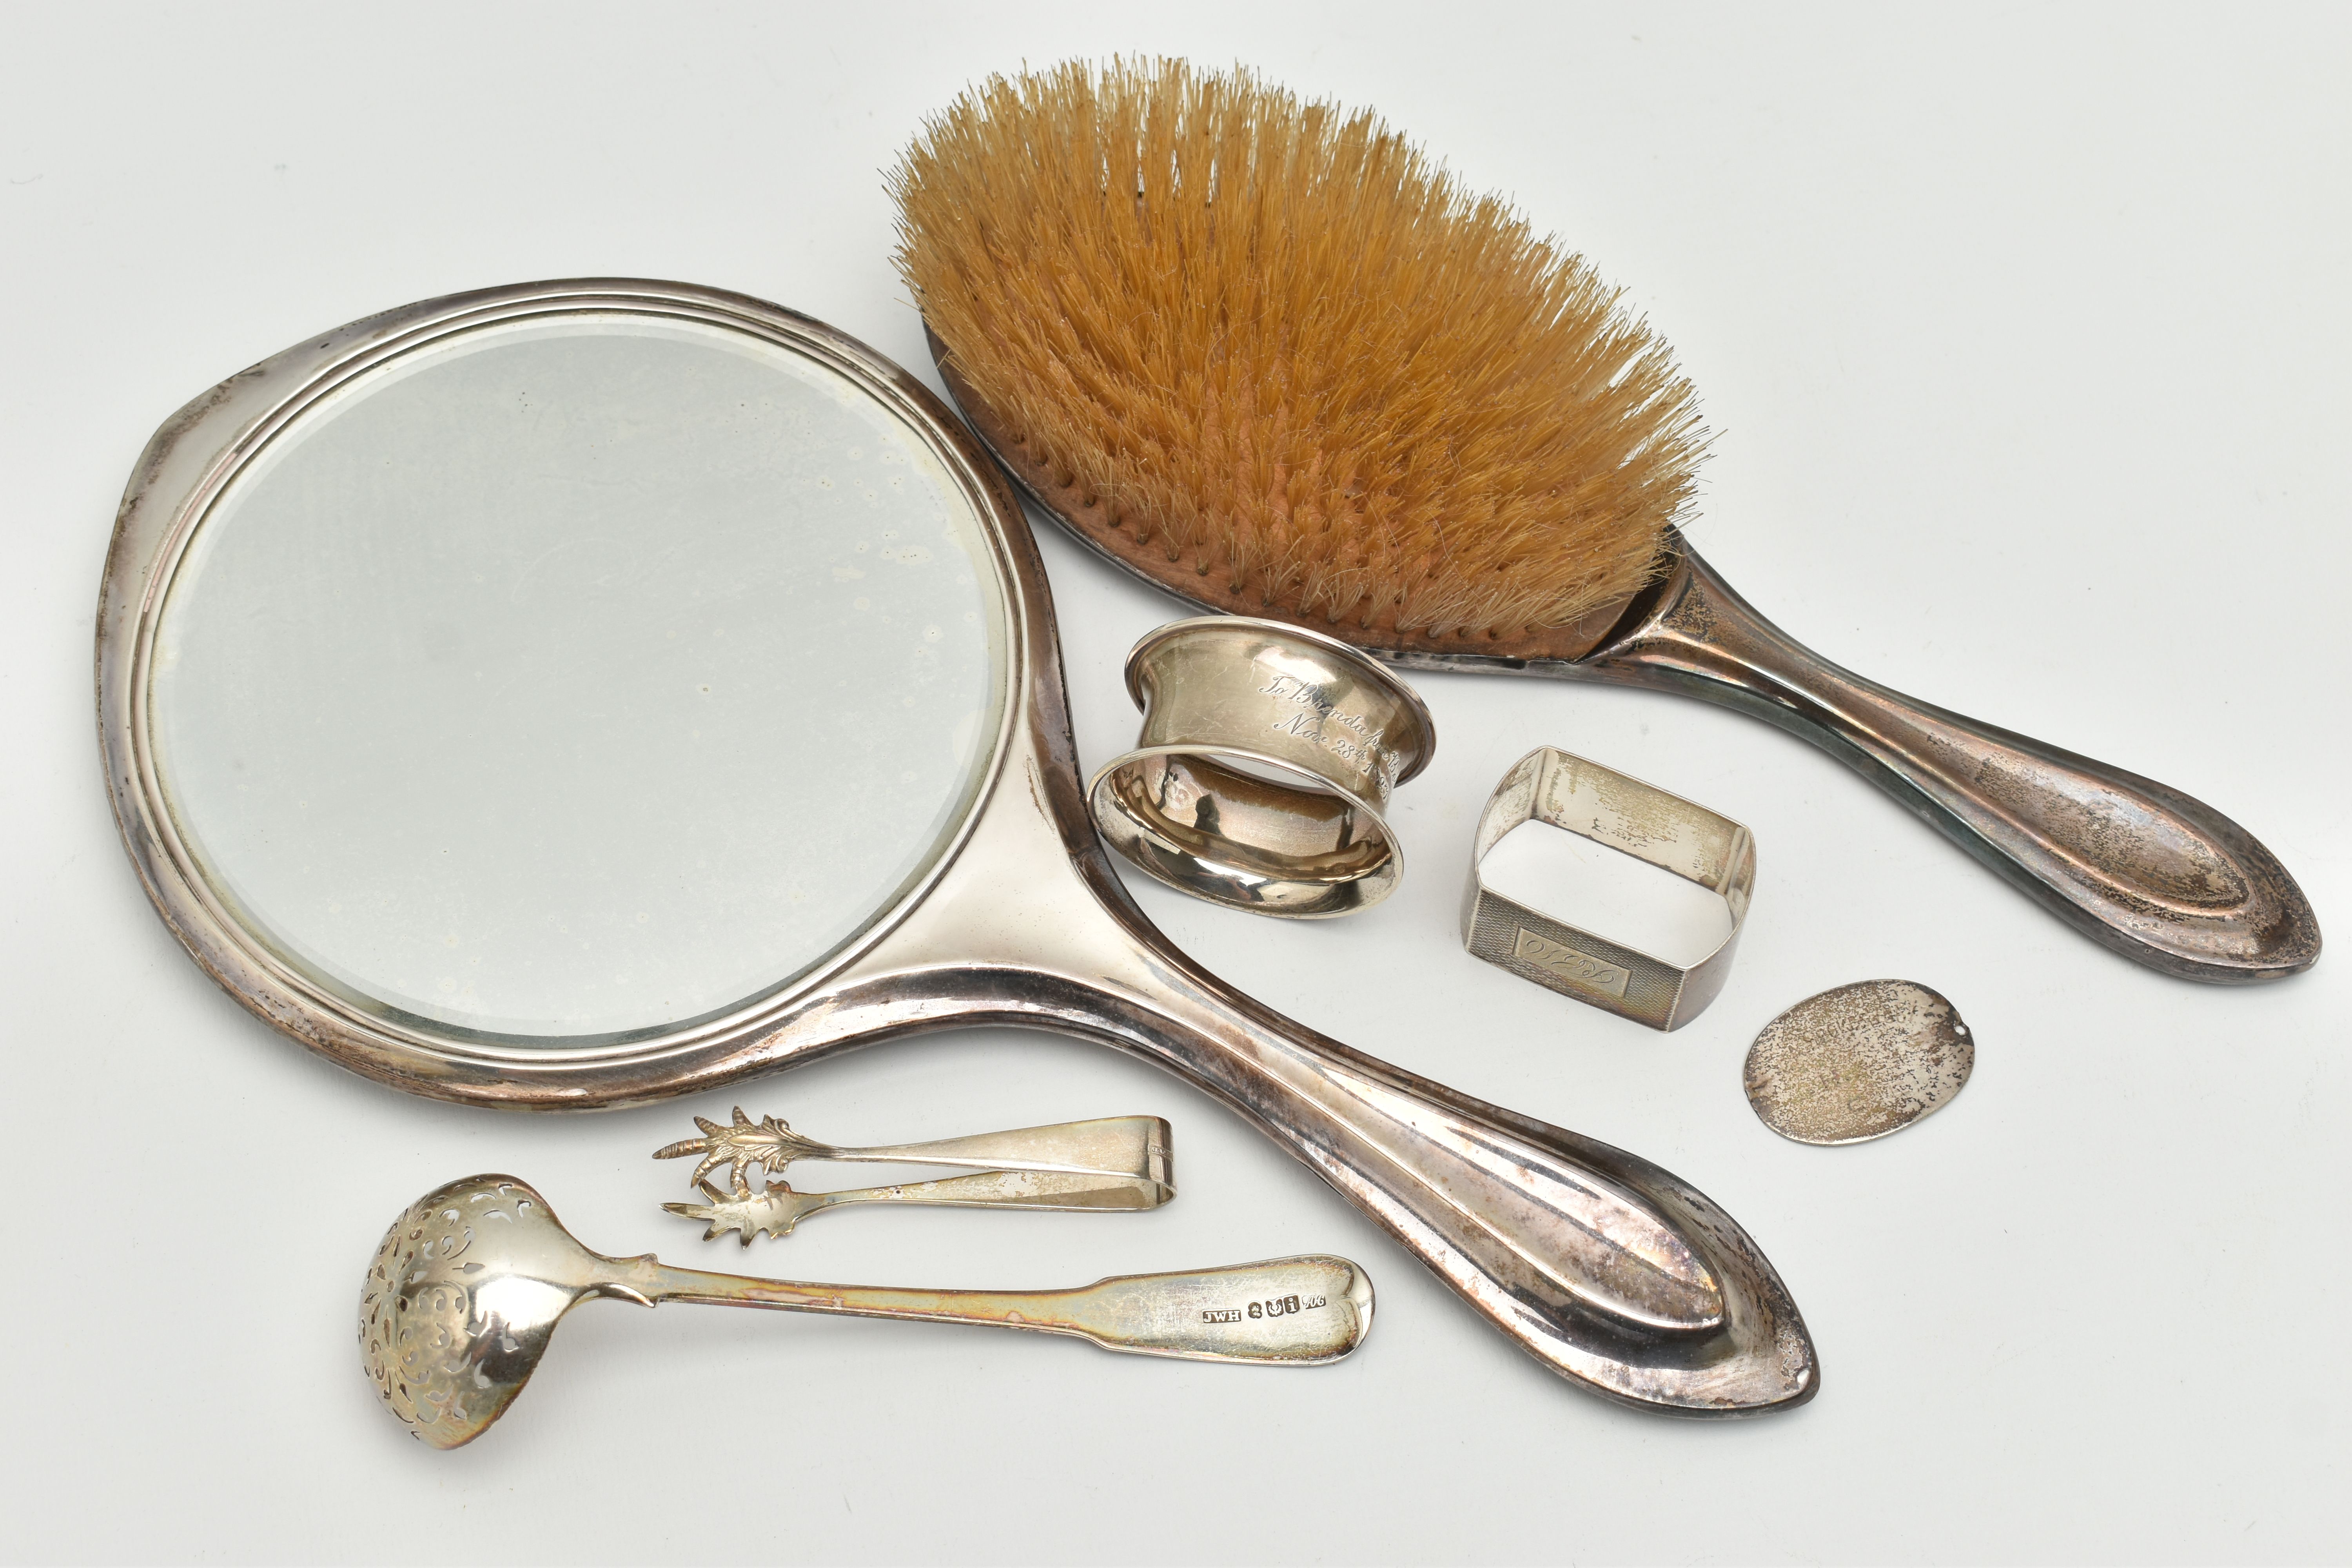 A SMALL ASSORTMENT OF SILVER, to include a hand held mirror and hair brush, hallmark rubbed - Image 3 of 3